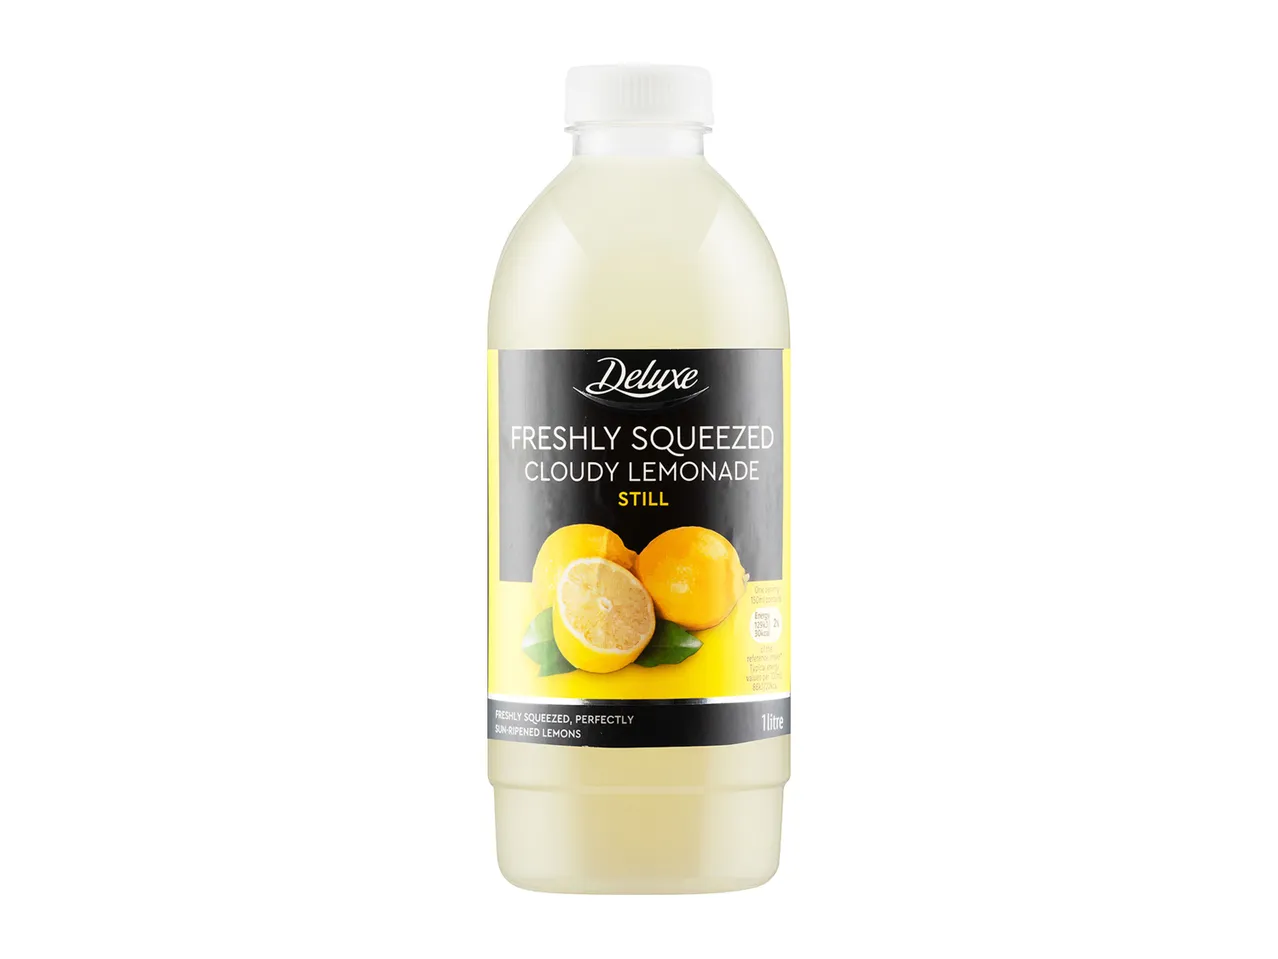 Go to full screen view: Deluxe Freshly Squeezed Lemonade Lemon Flavours - Image 1